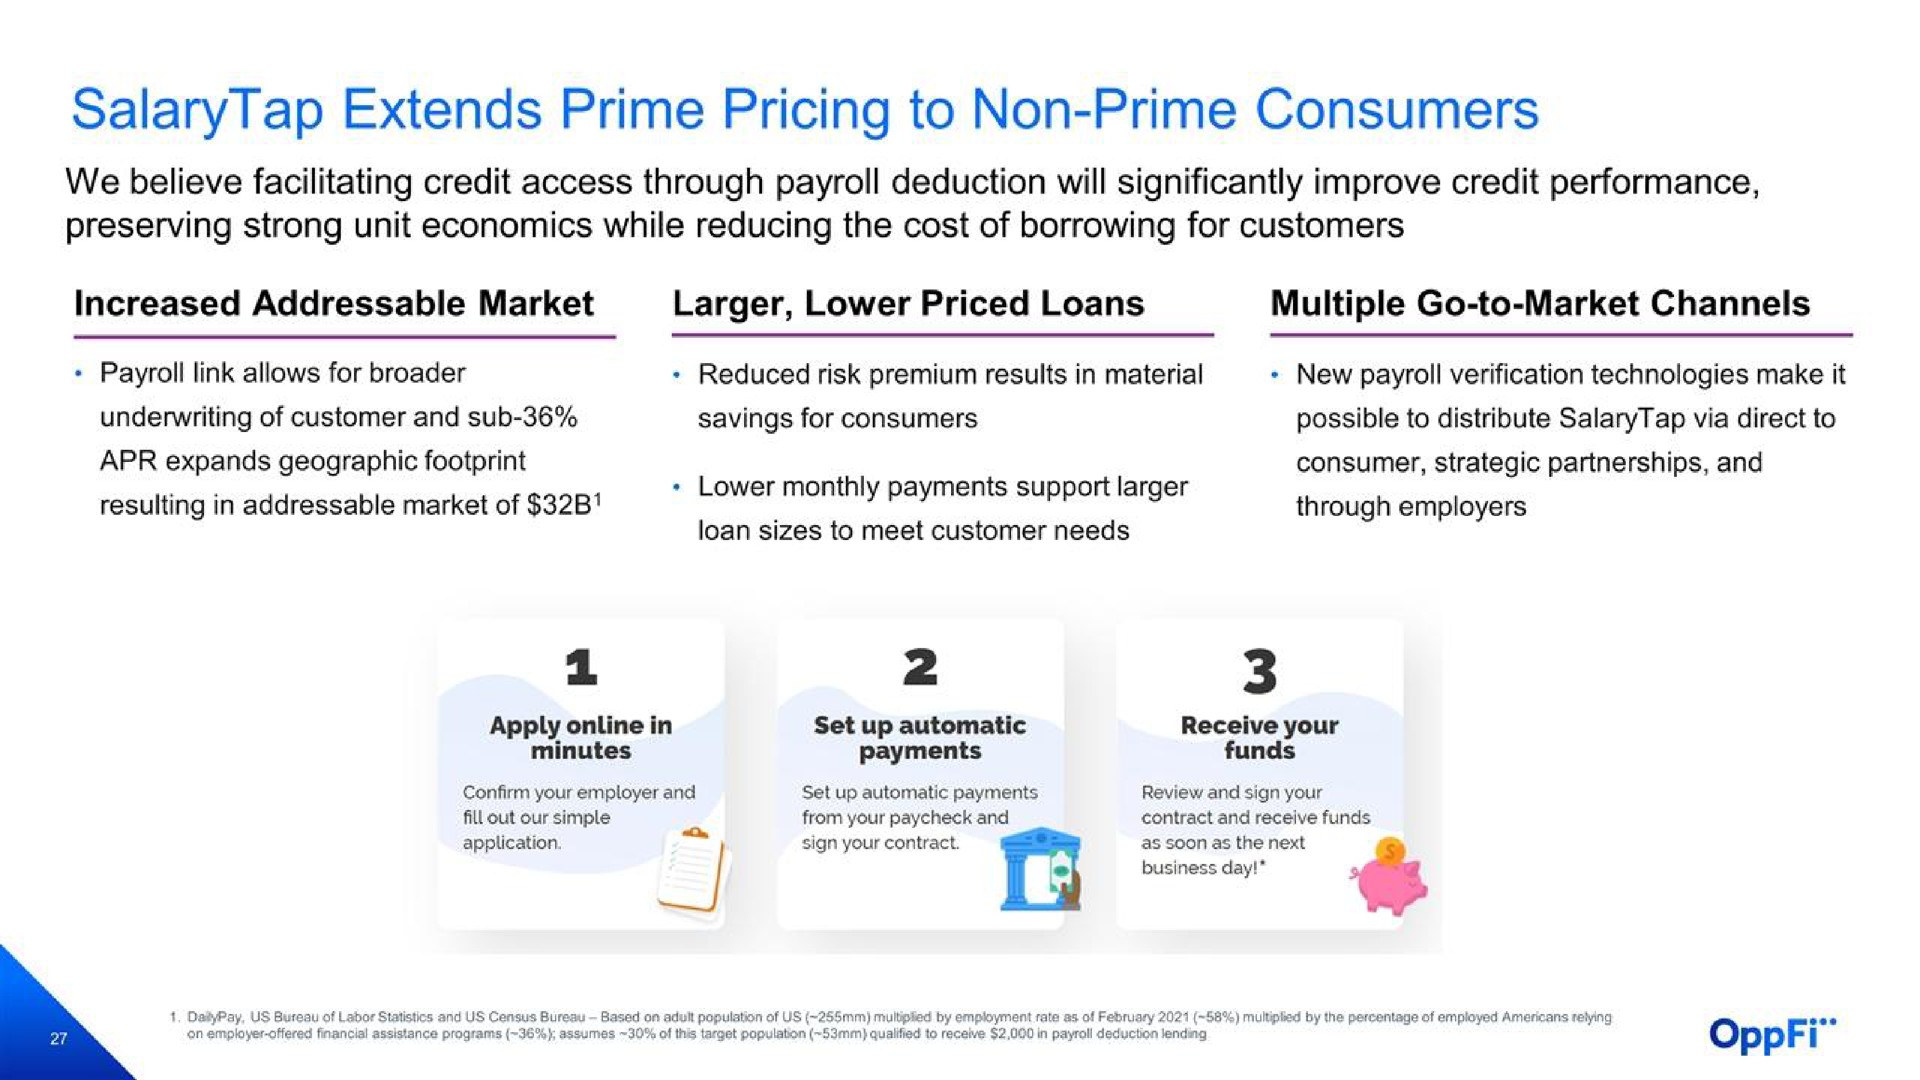 extends prime pricing to non prime consumers | OppFi